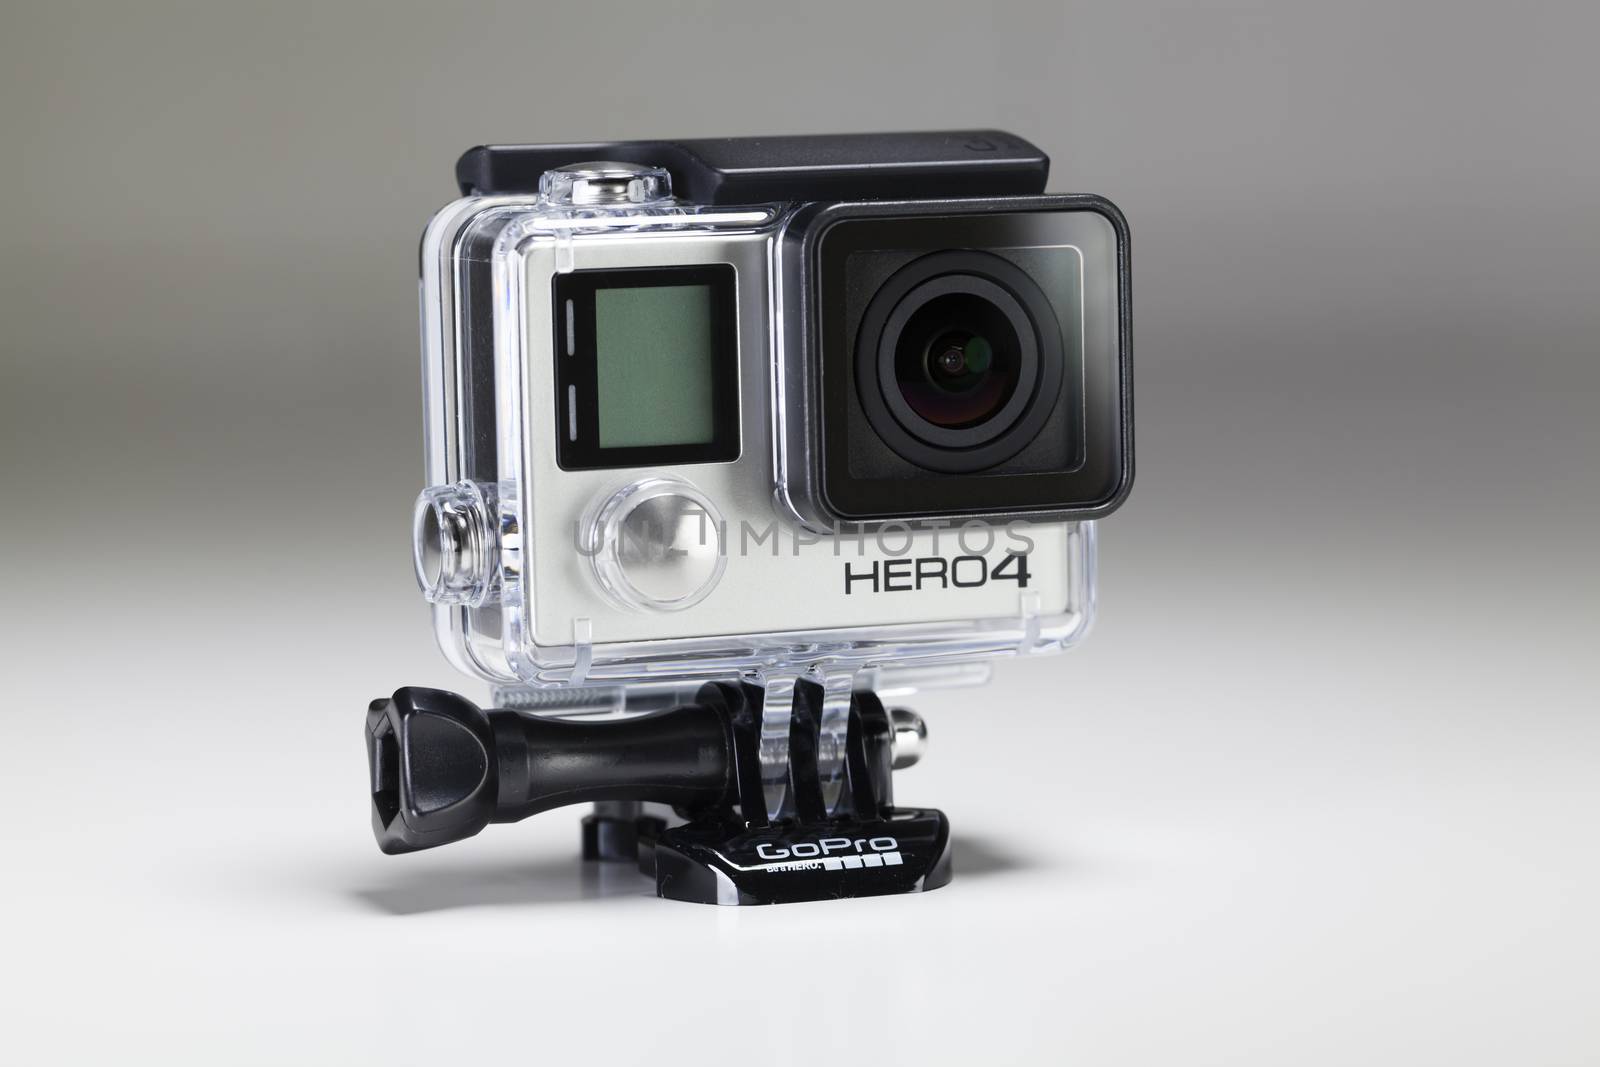 Adelaide, Australia - Oct 13: Studio shot of GoPro Hero 4 Black on Oct 13, 2014. It is a compact, lightweight personal camera manufactured by GoPro Inc. The camera is often used in extreme action video photography.